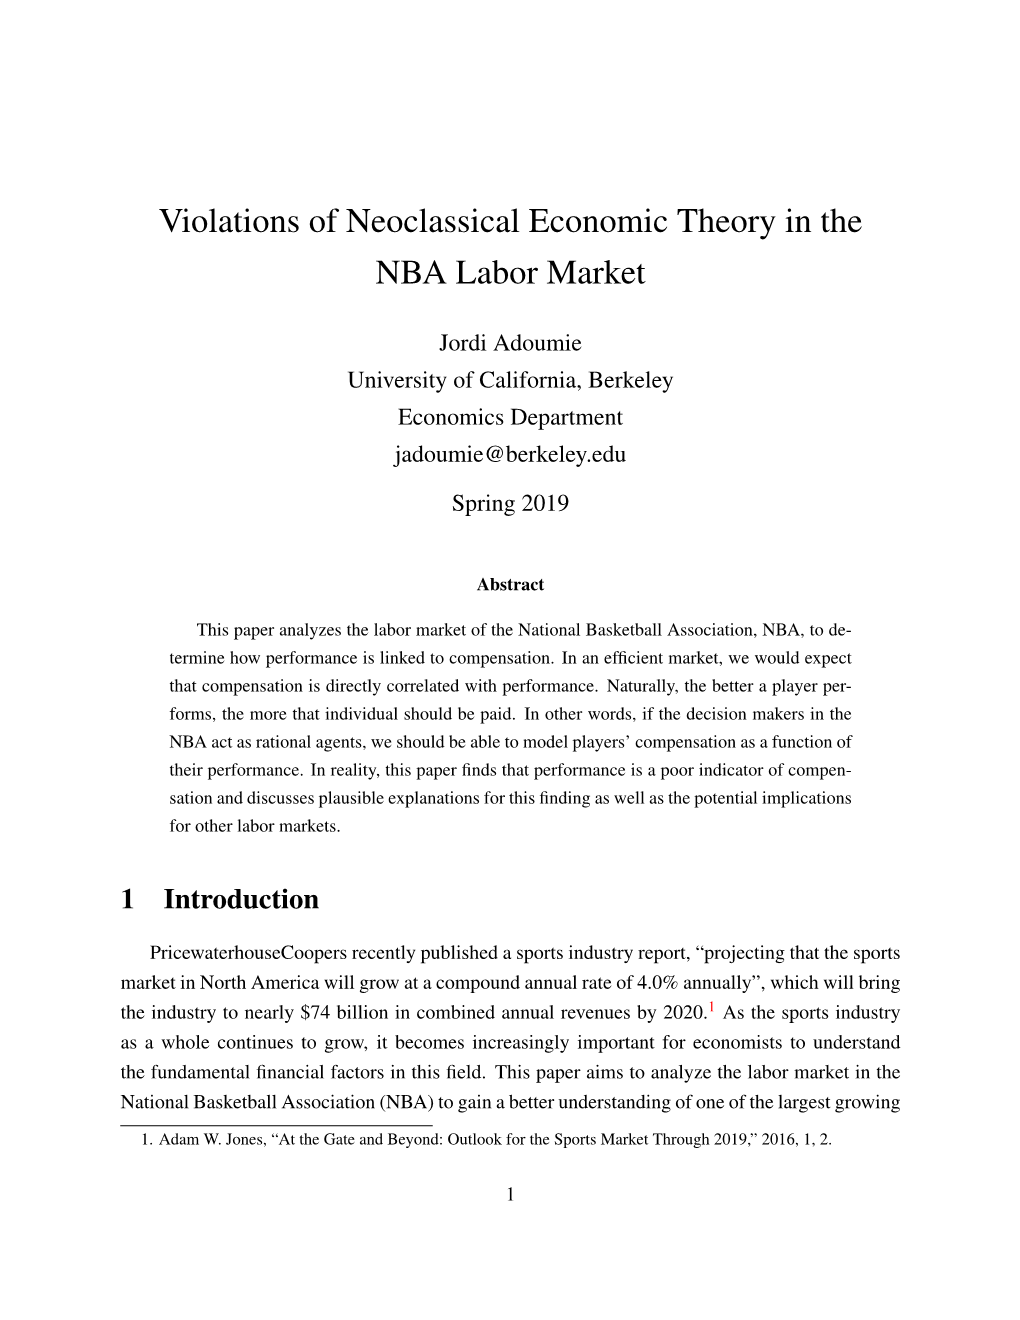 Violations of Neoclassical Economic Theory in the NBA Labor Market